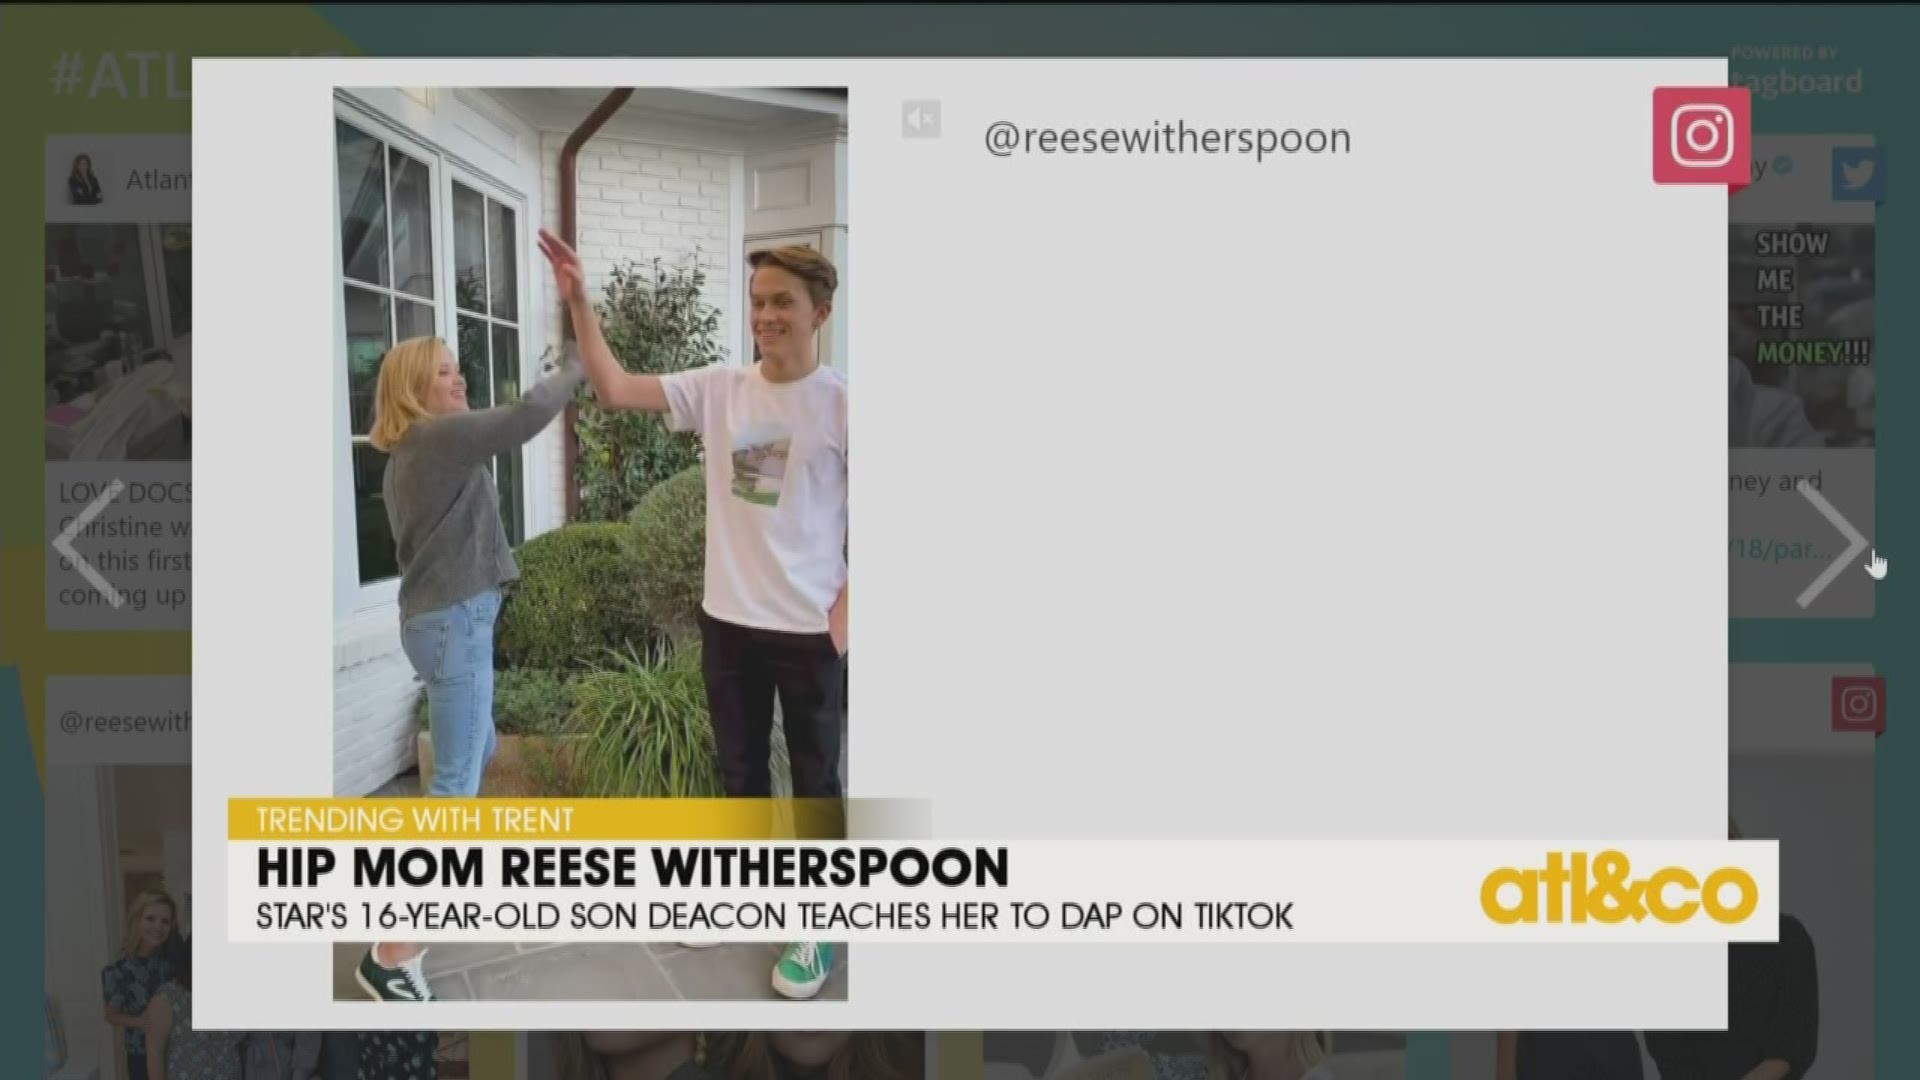 Reese Witherspoon's 16-year-old son Deacon teaches her the "dapping" handshake. We try it out on 'Atlanta & Company'